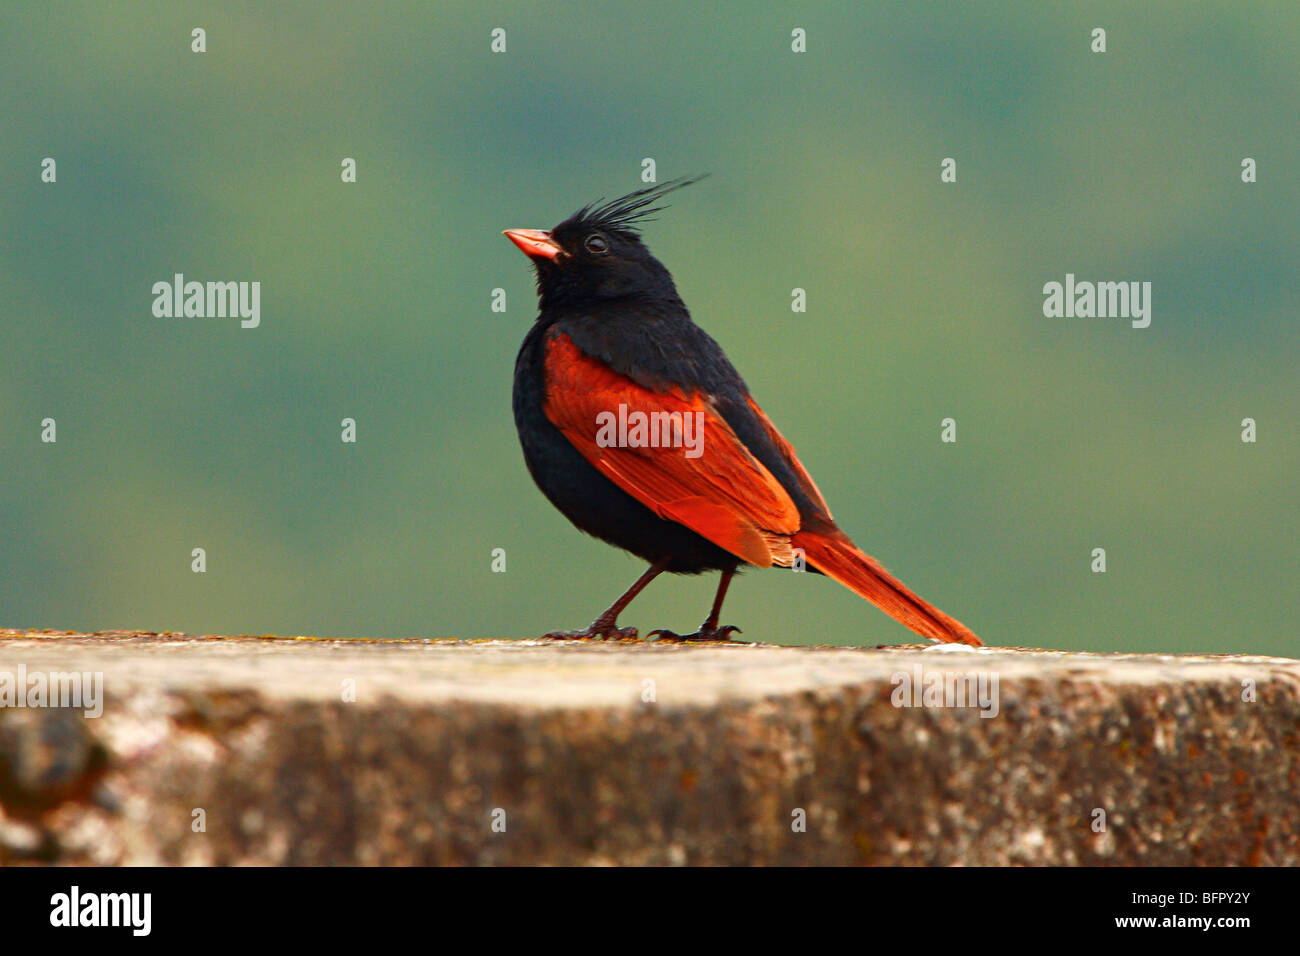 Crested Bunting (Melophus lathami) is a species of bird in the Emberizidae family. Its genus Melophus is monotypic. Stock Photo